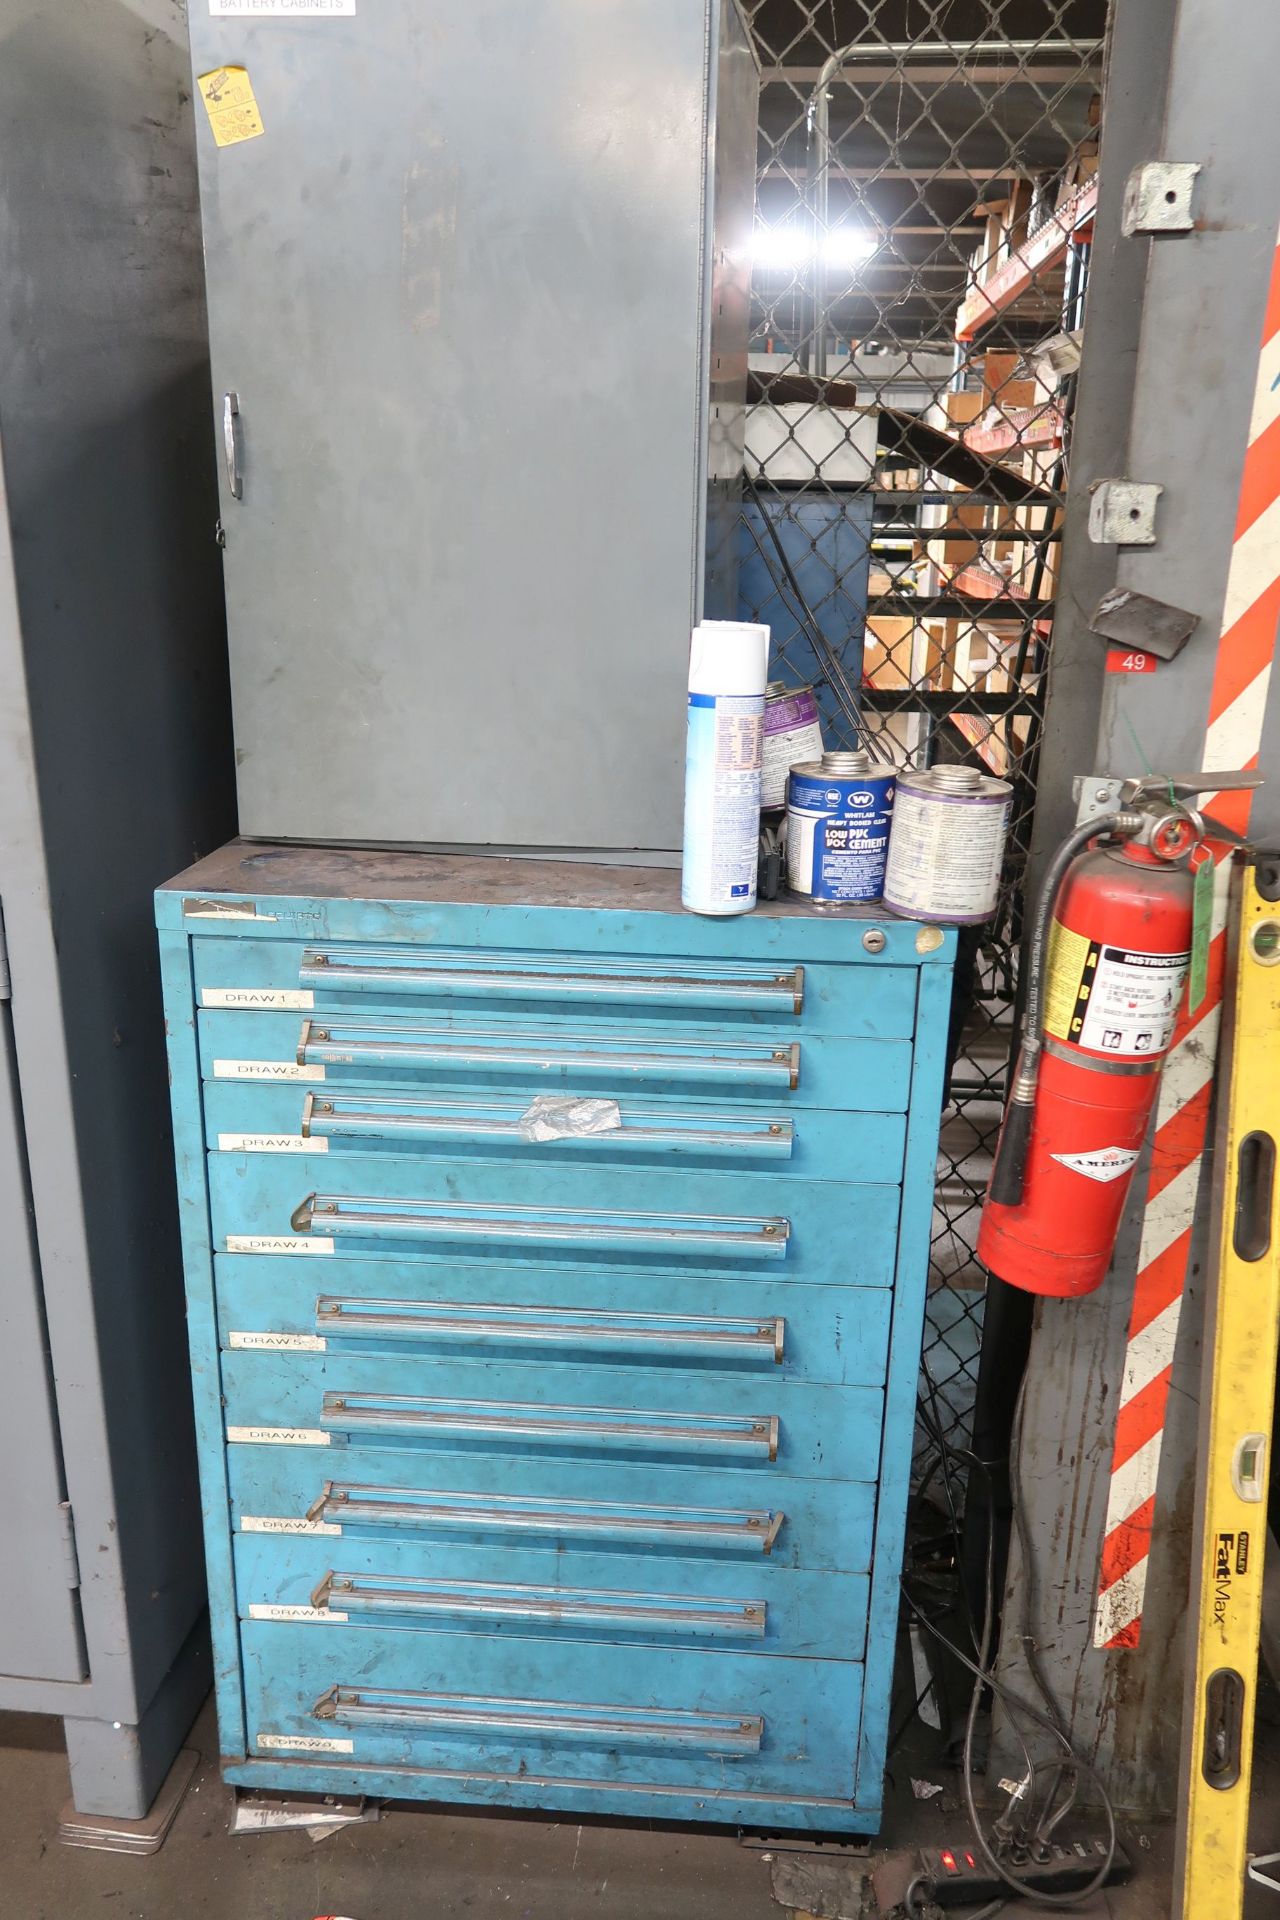 (LOT) CABINETS AND RACKS WITH MAINTENANCE SUPPLIES UNDER STEP **LOADING PRICE DUE TO ERRA - $1,500. - Image 6 of 15